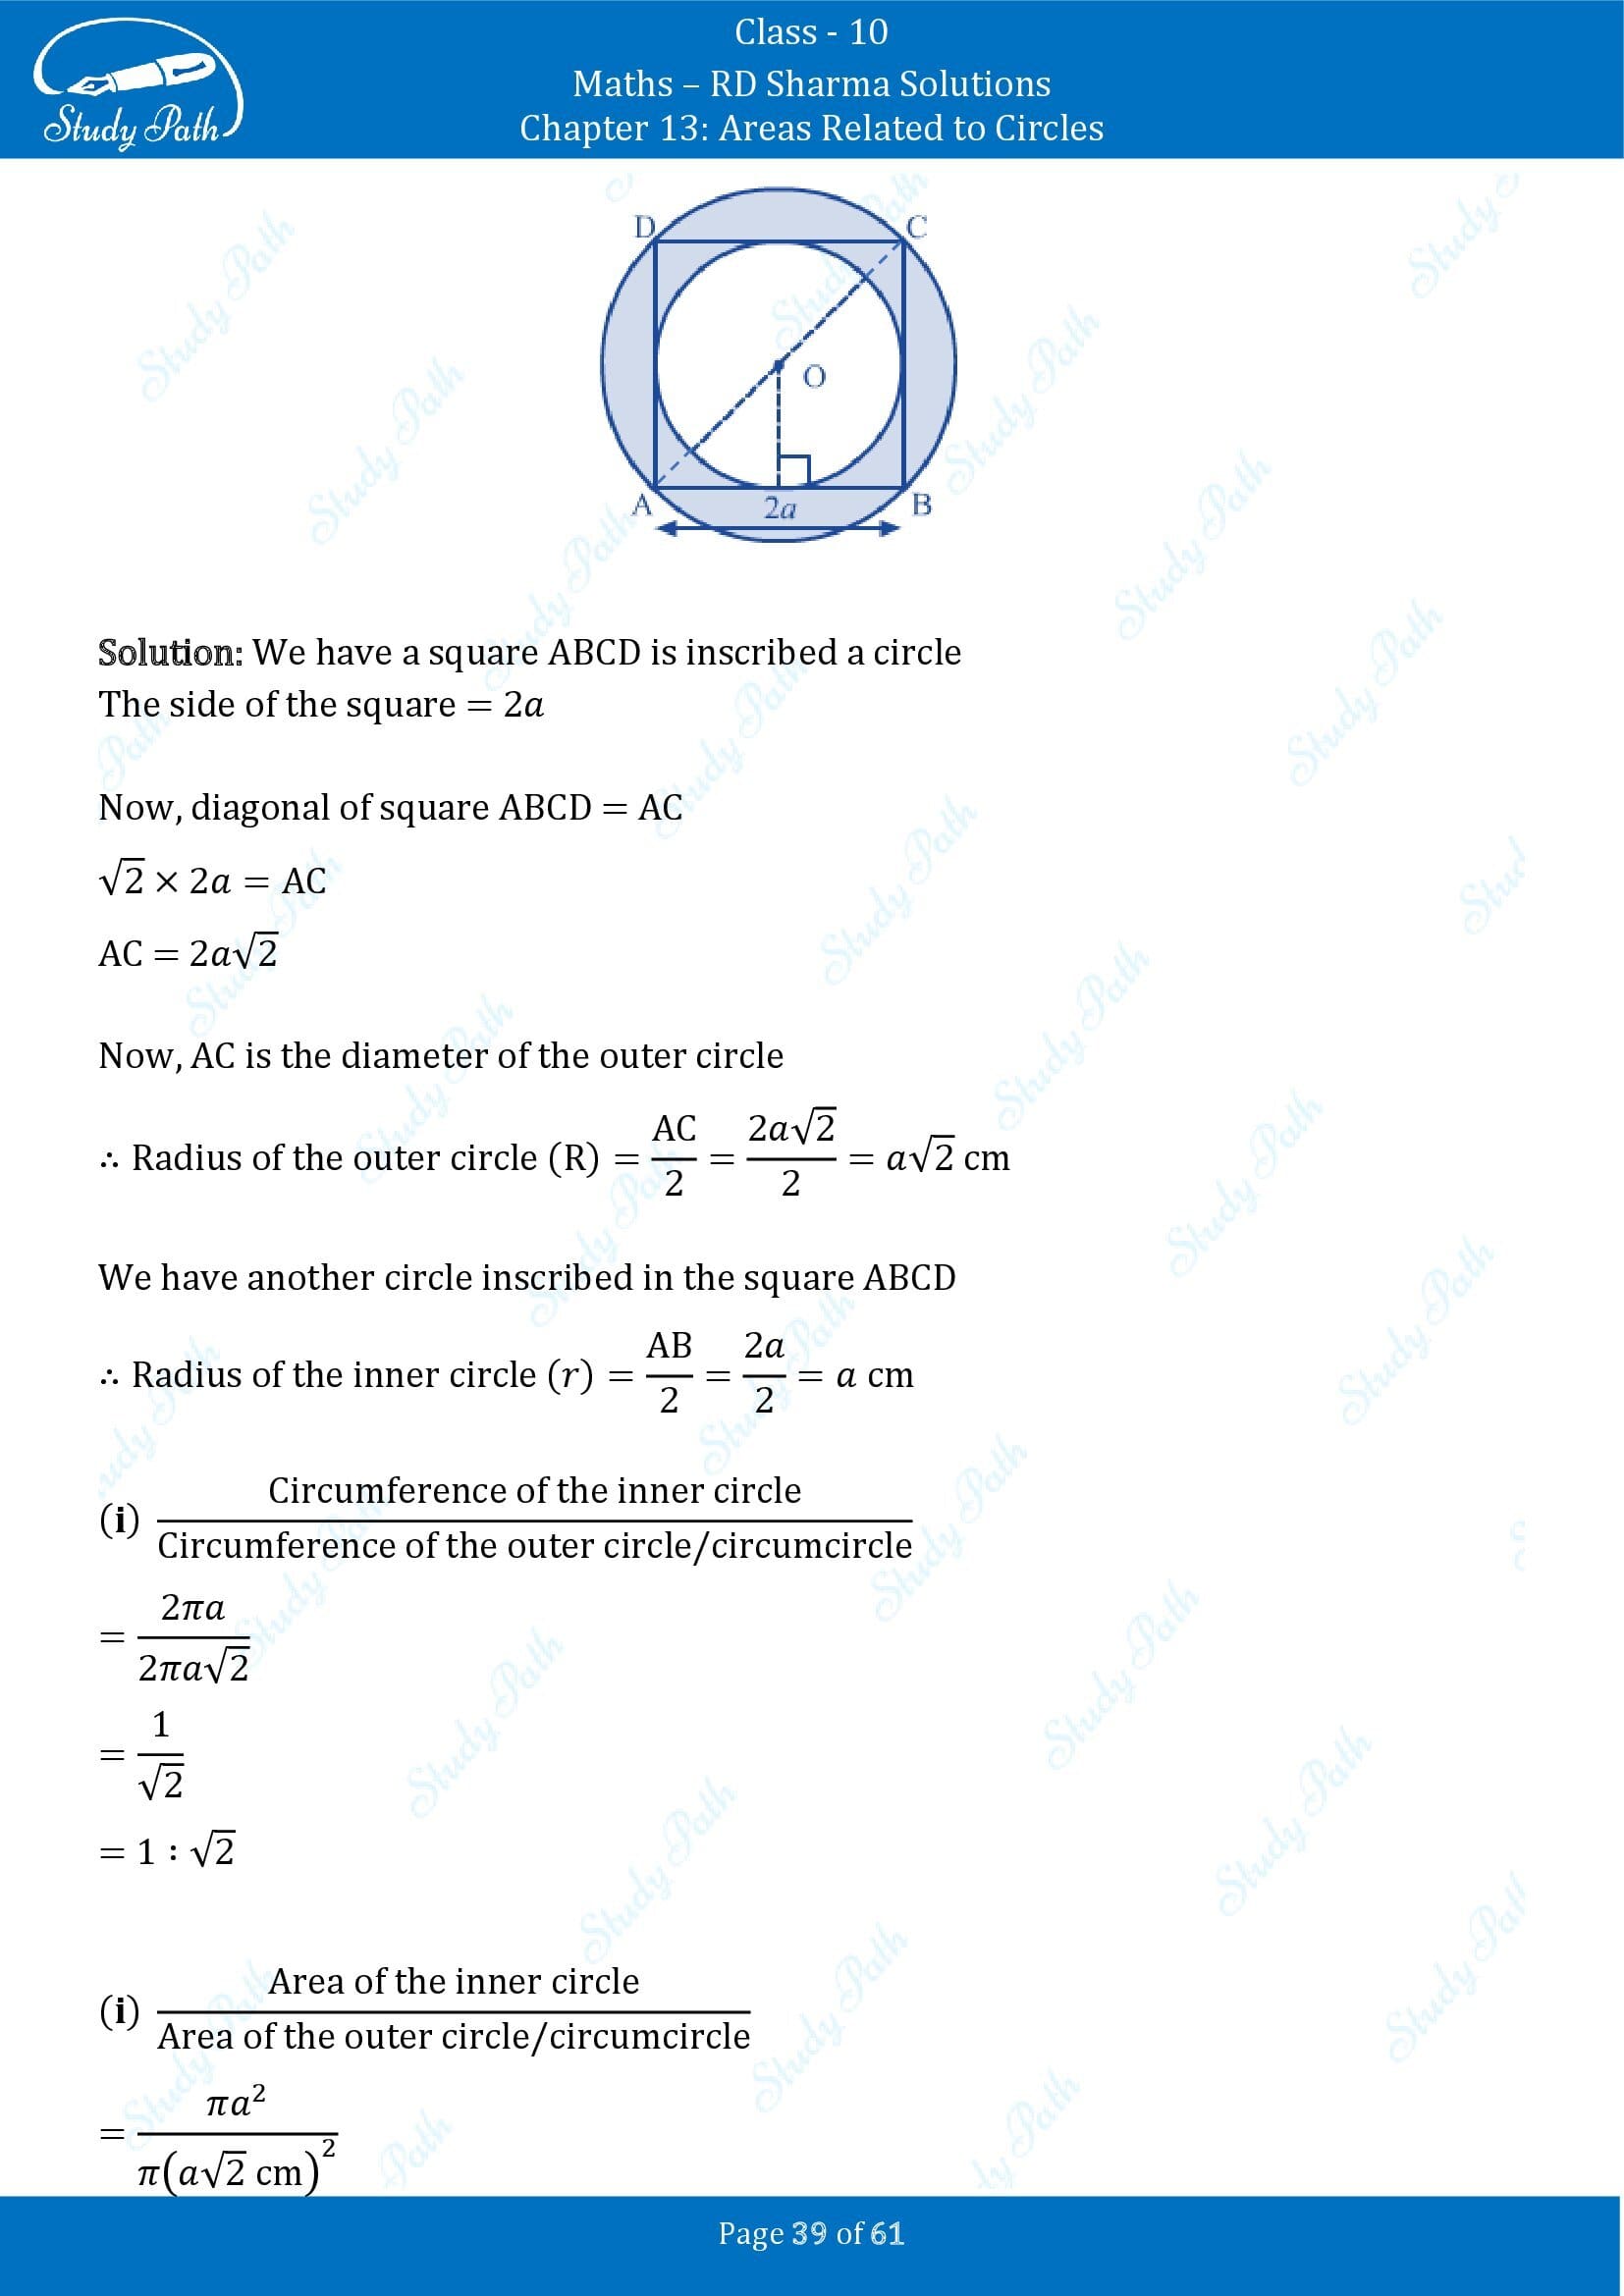 RD Sharma Solutions Class 10 Chapter 13 Areas Related to Circles Exercise 13.4 00039